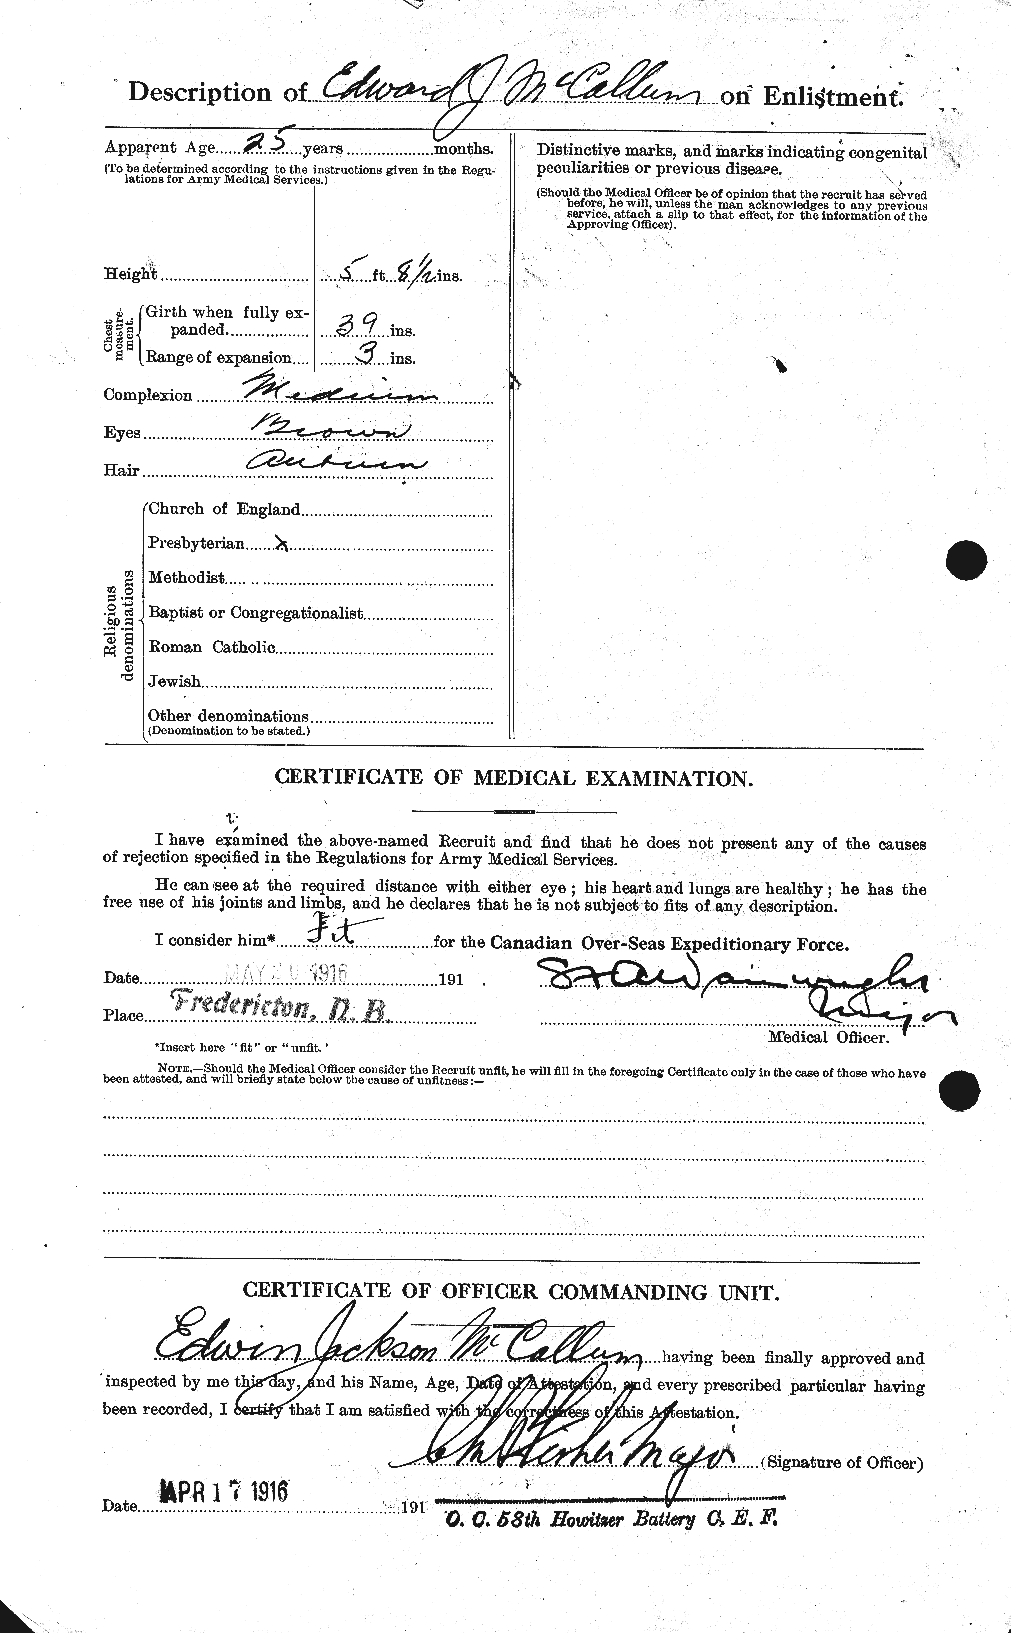 Personnel Records of the First World War - CEF 131617b